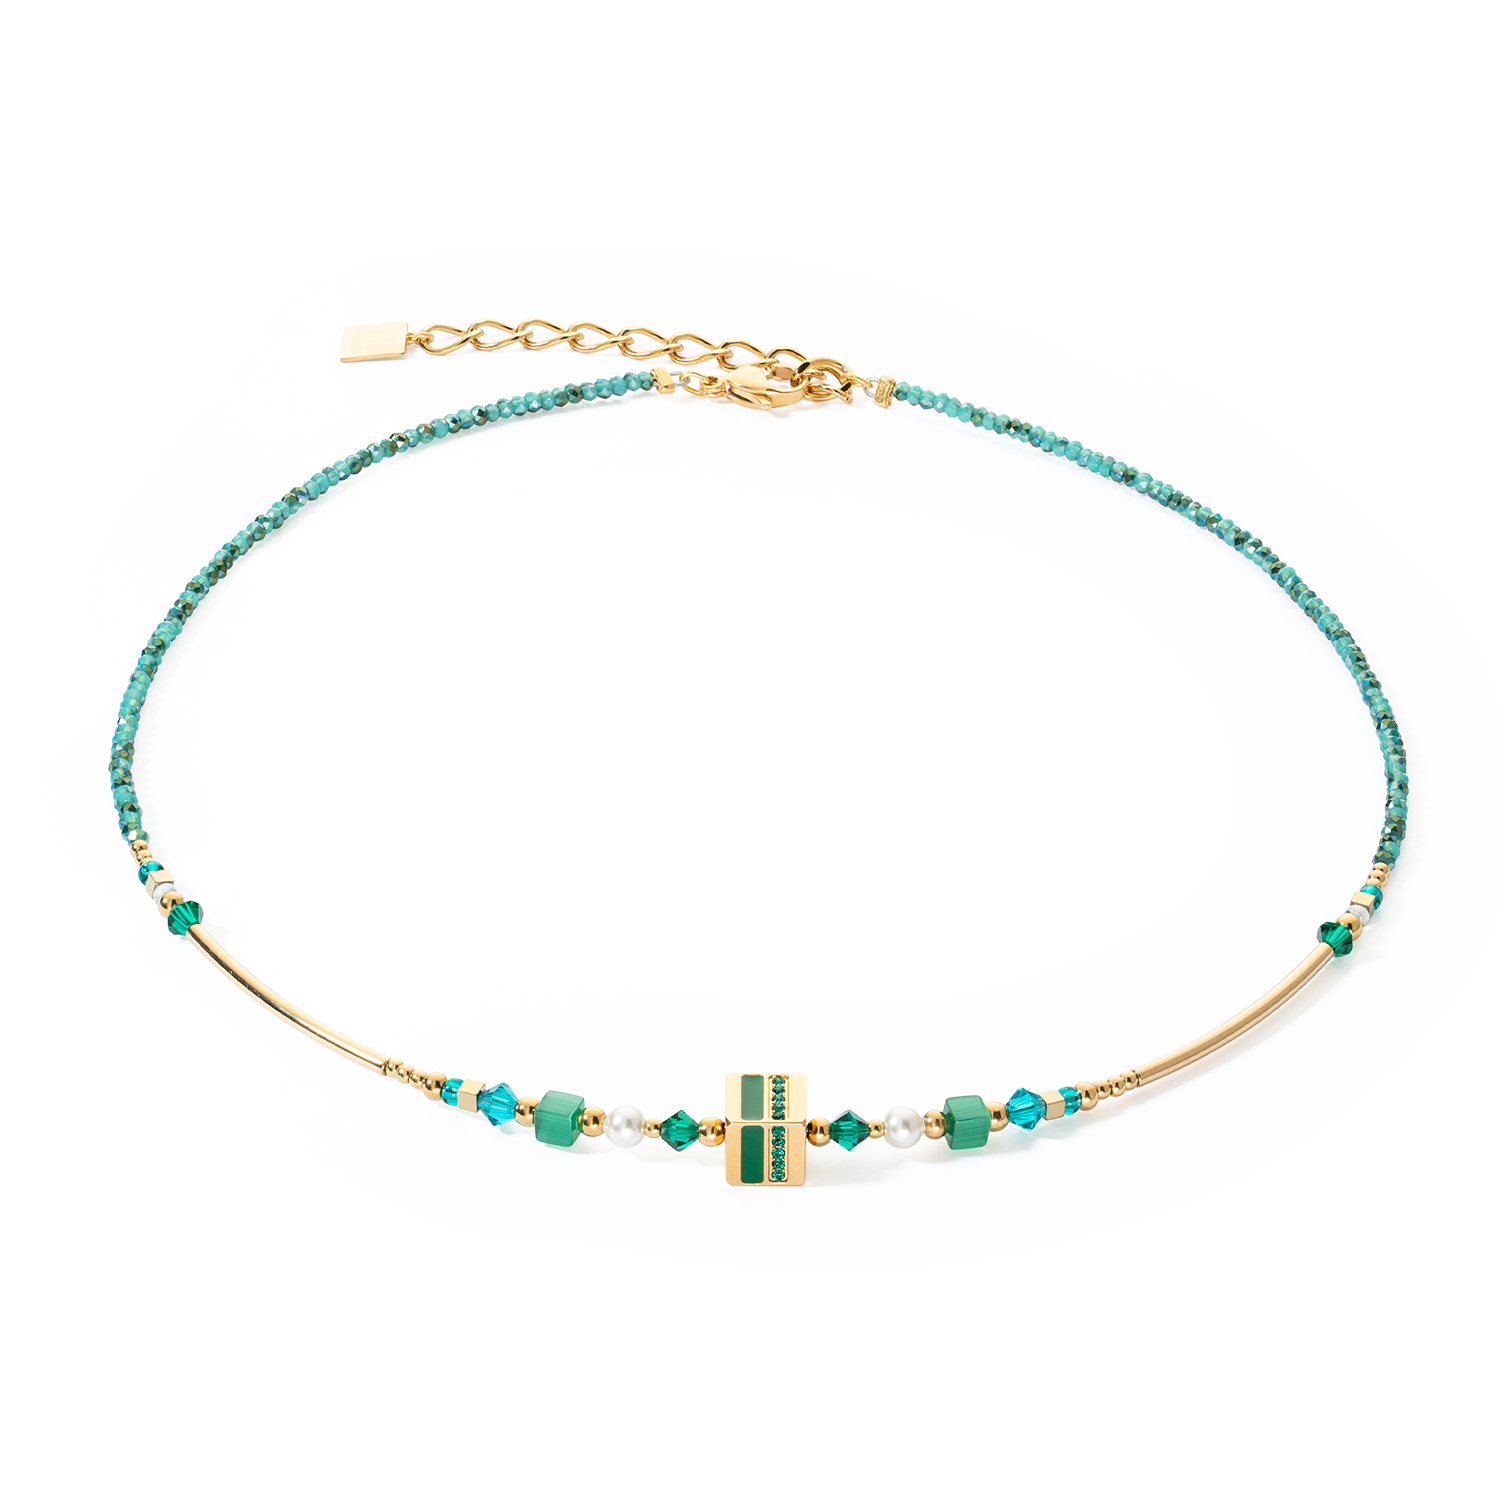 Necklace Square Stripes gold-green